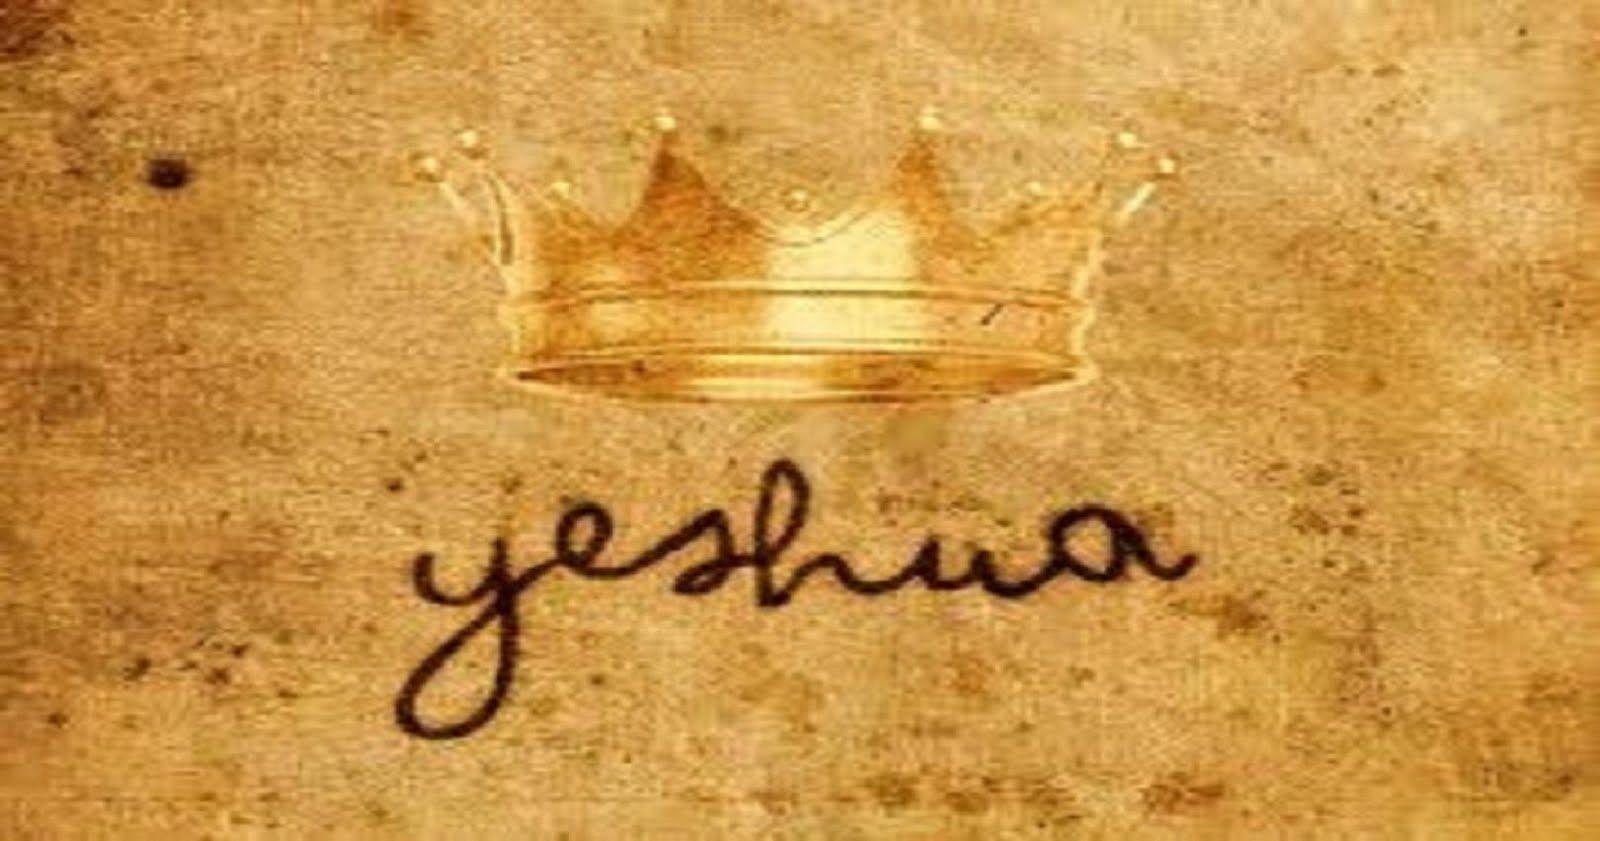 The Lie of Jesus Christ and how his real name was Yeshua HaMashiach